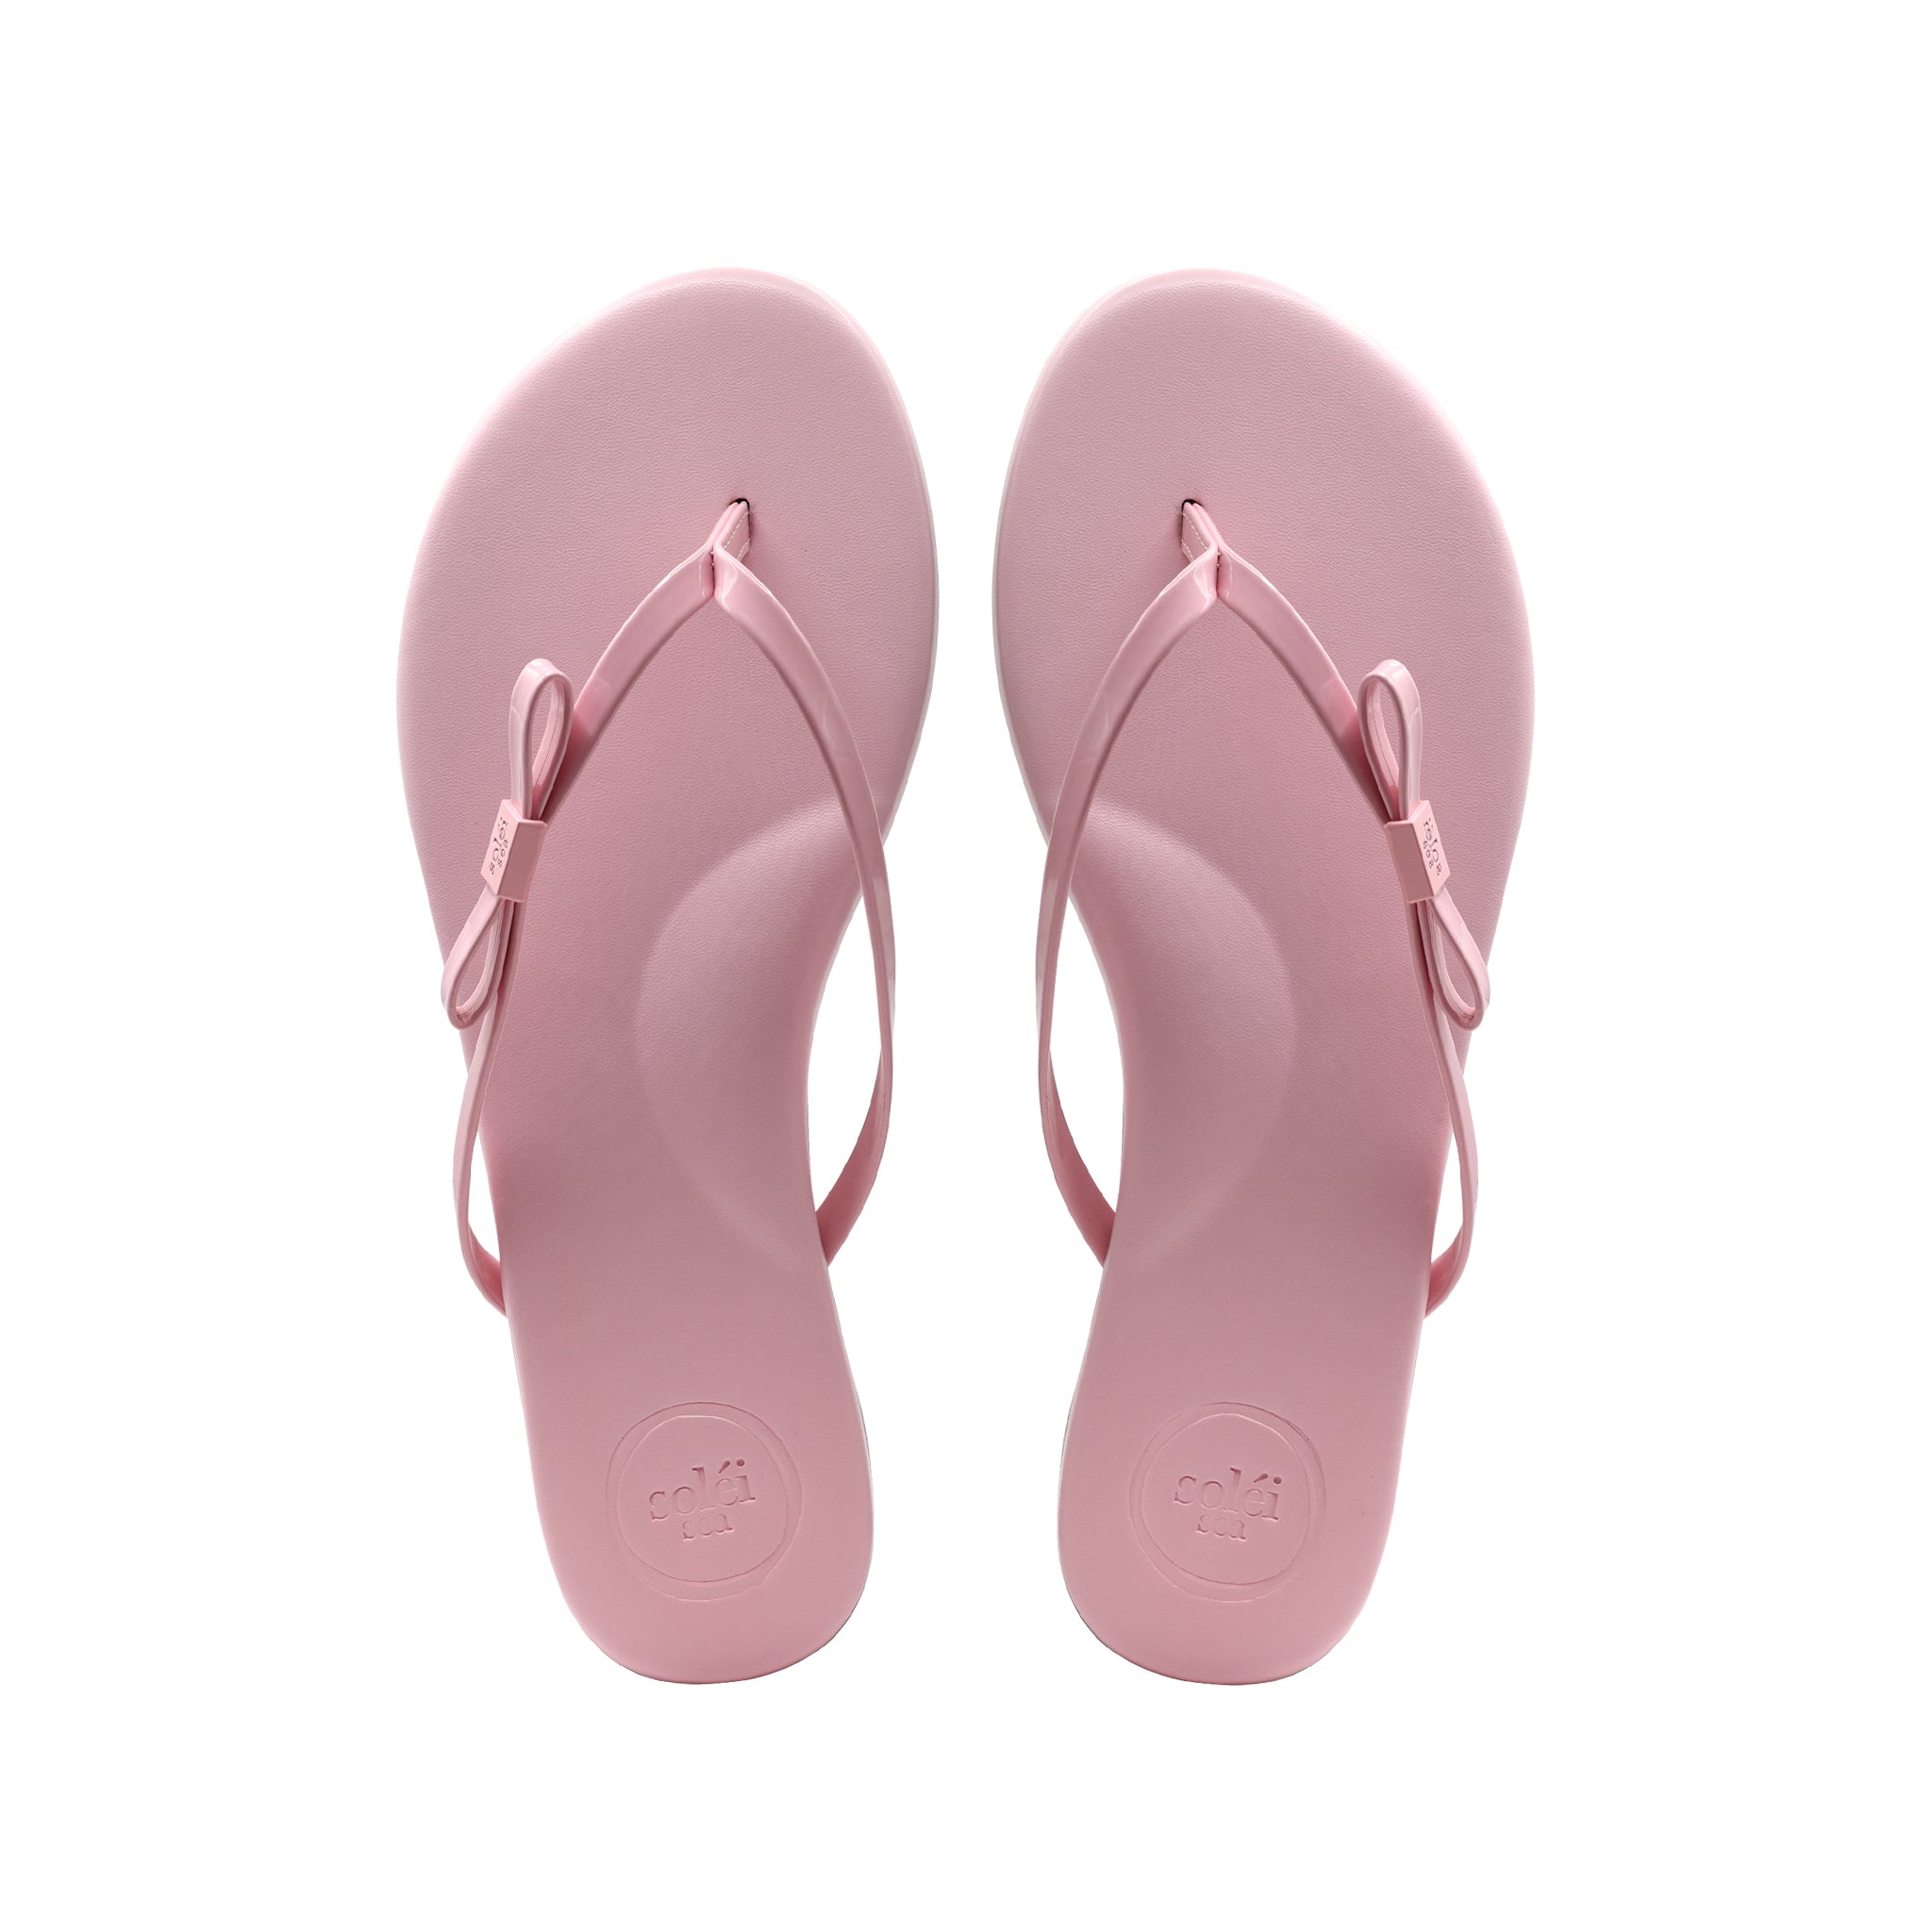 Soléi Classic Indie Sandal with a mini bow on the patent straps. Light Barbie Pink! So cute!